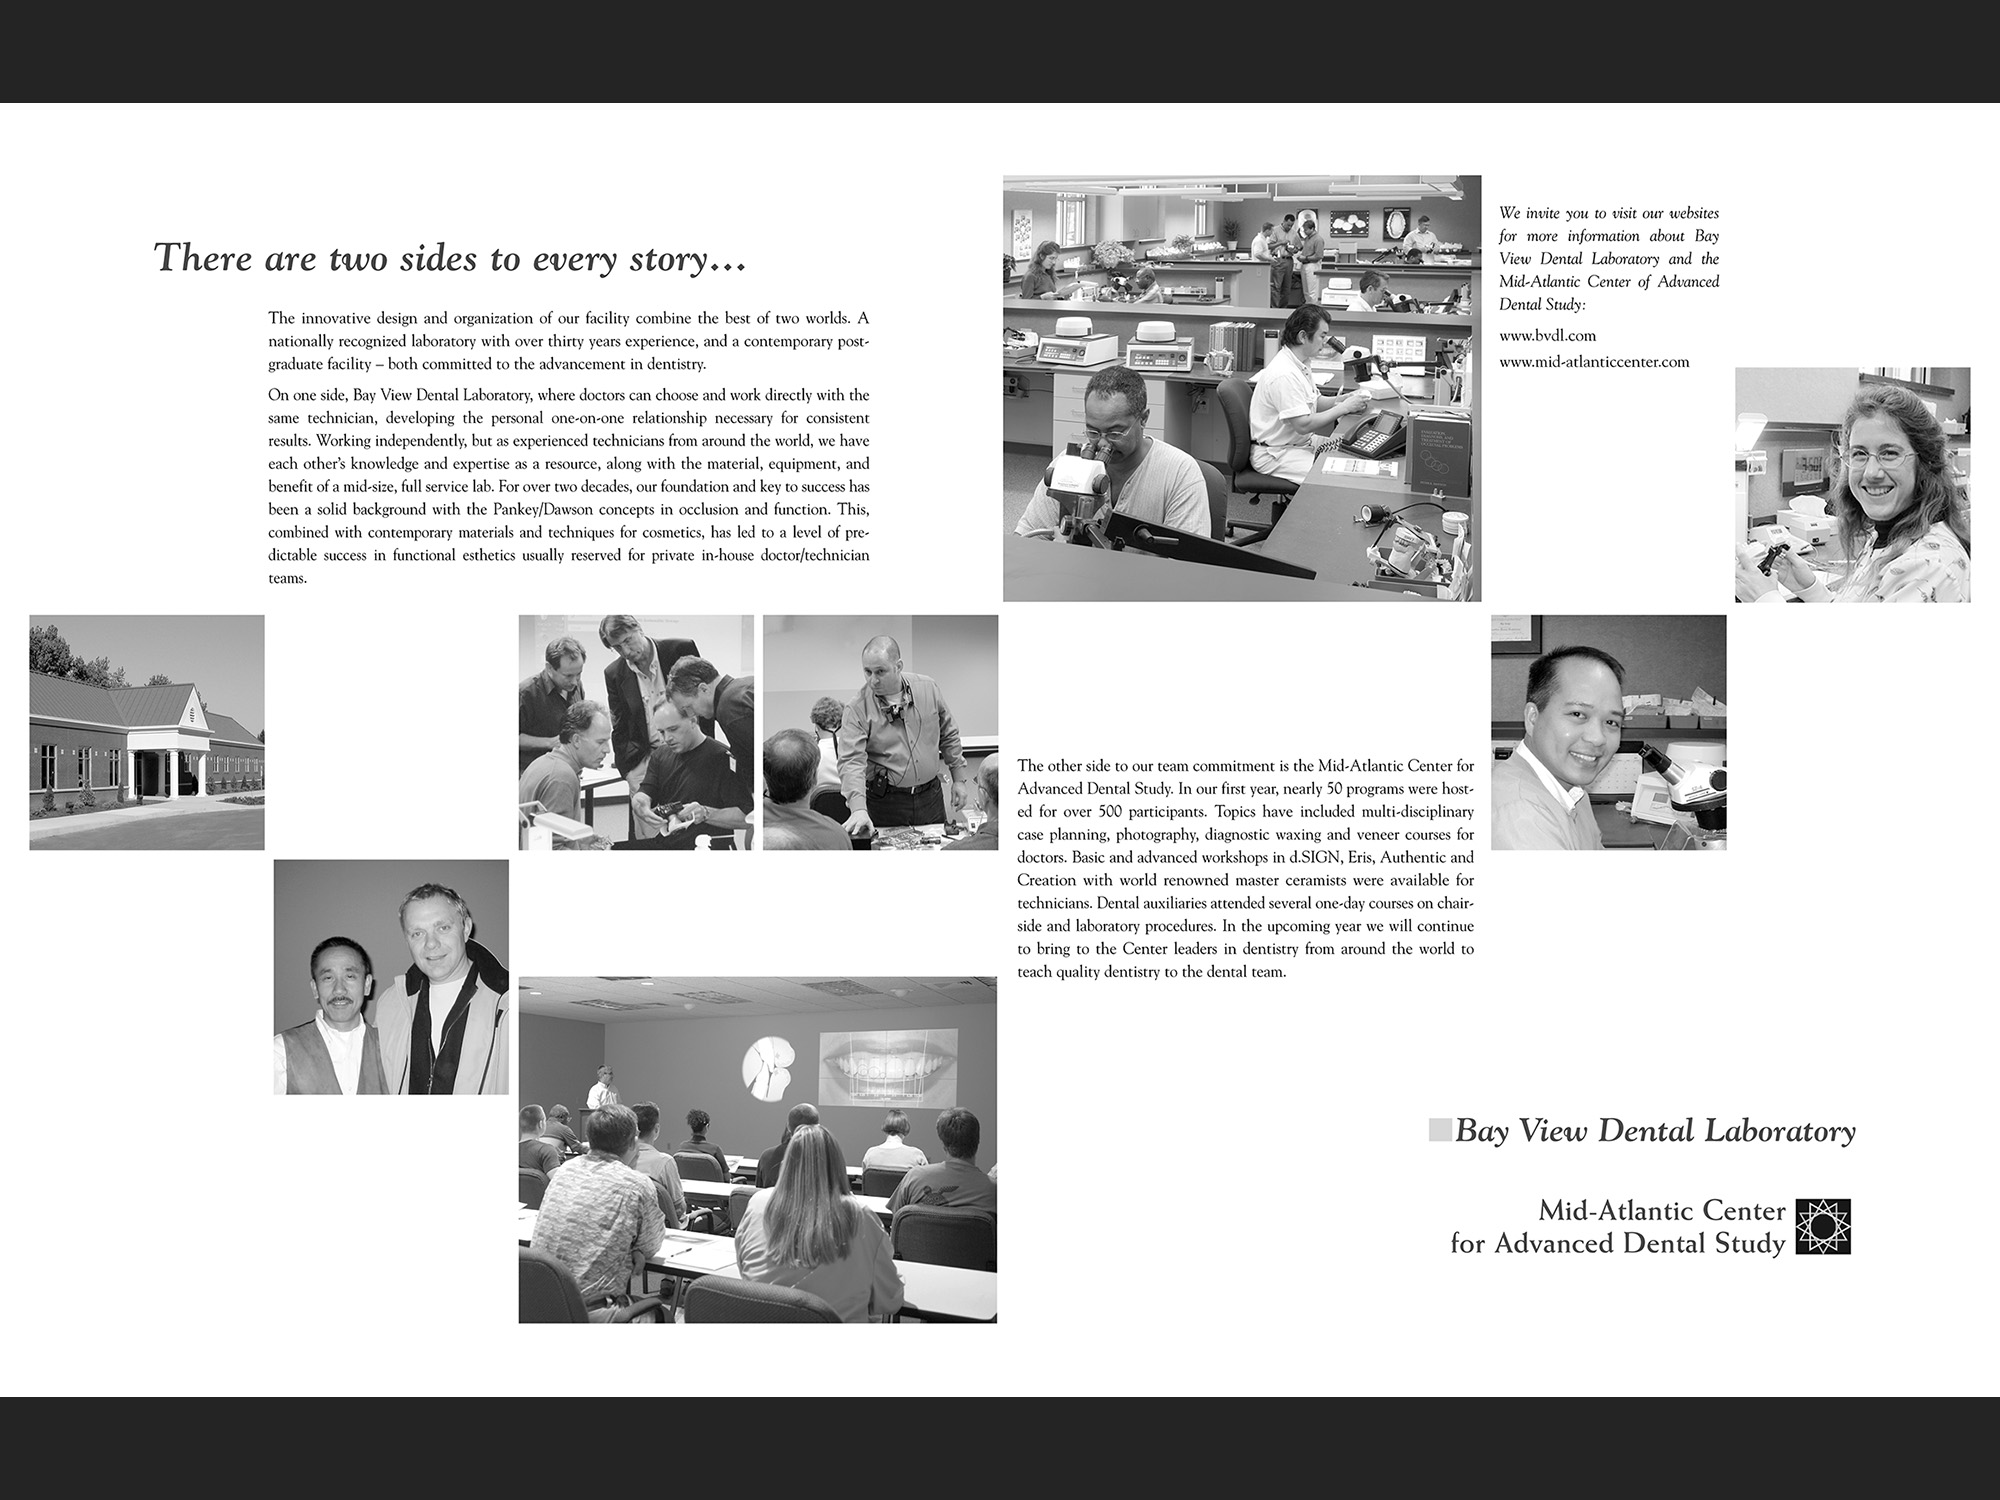 "There are two sides to every story:Bay View Dental Lab", 2004; B&W spread for conference program.